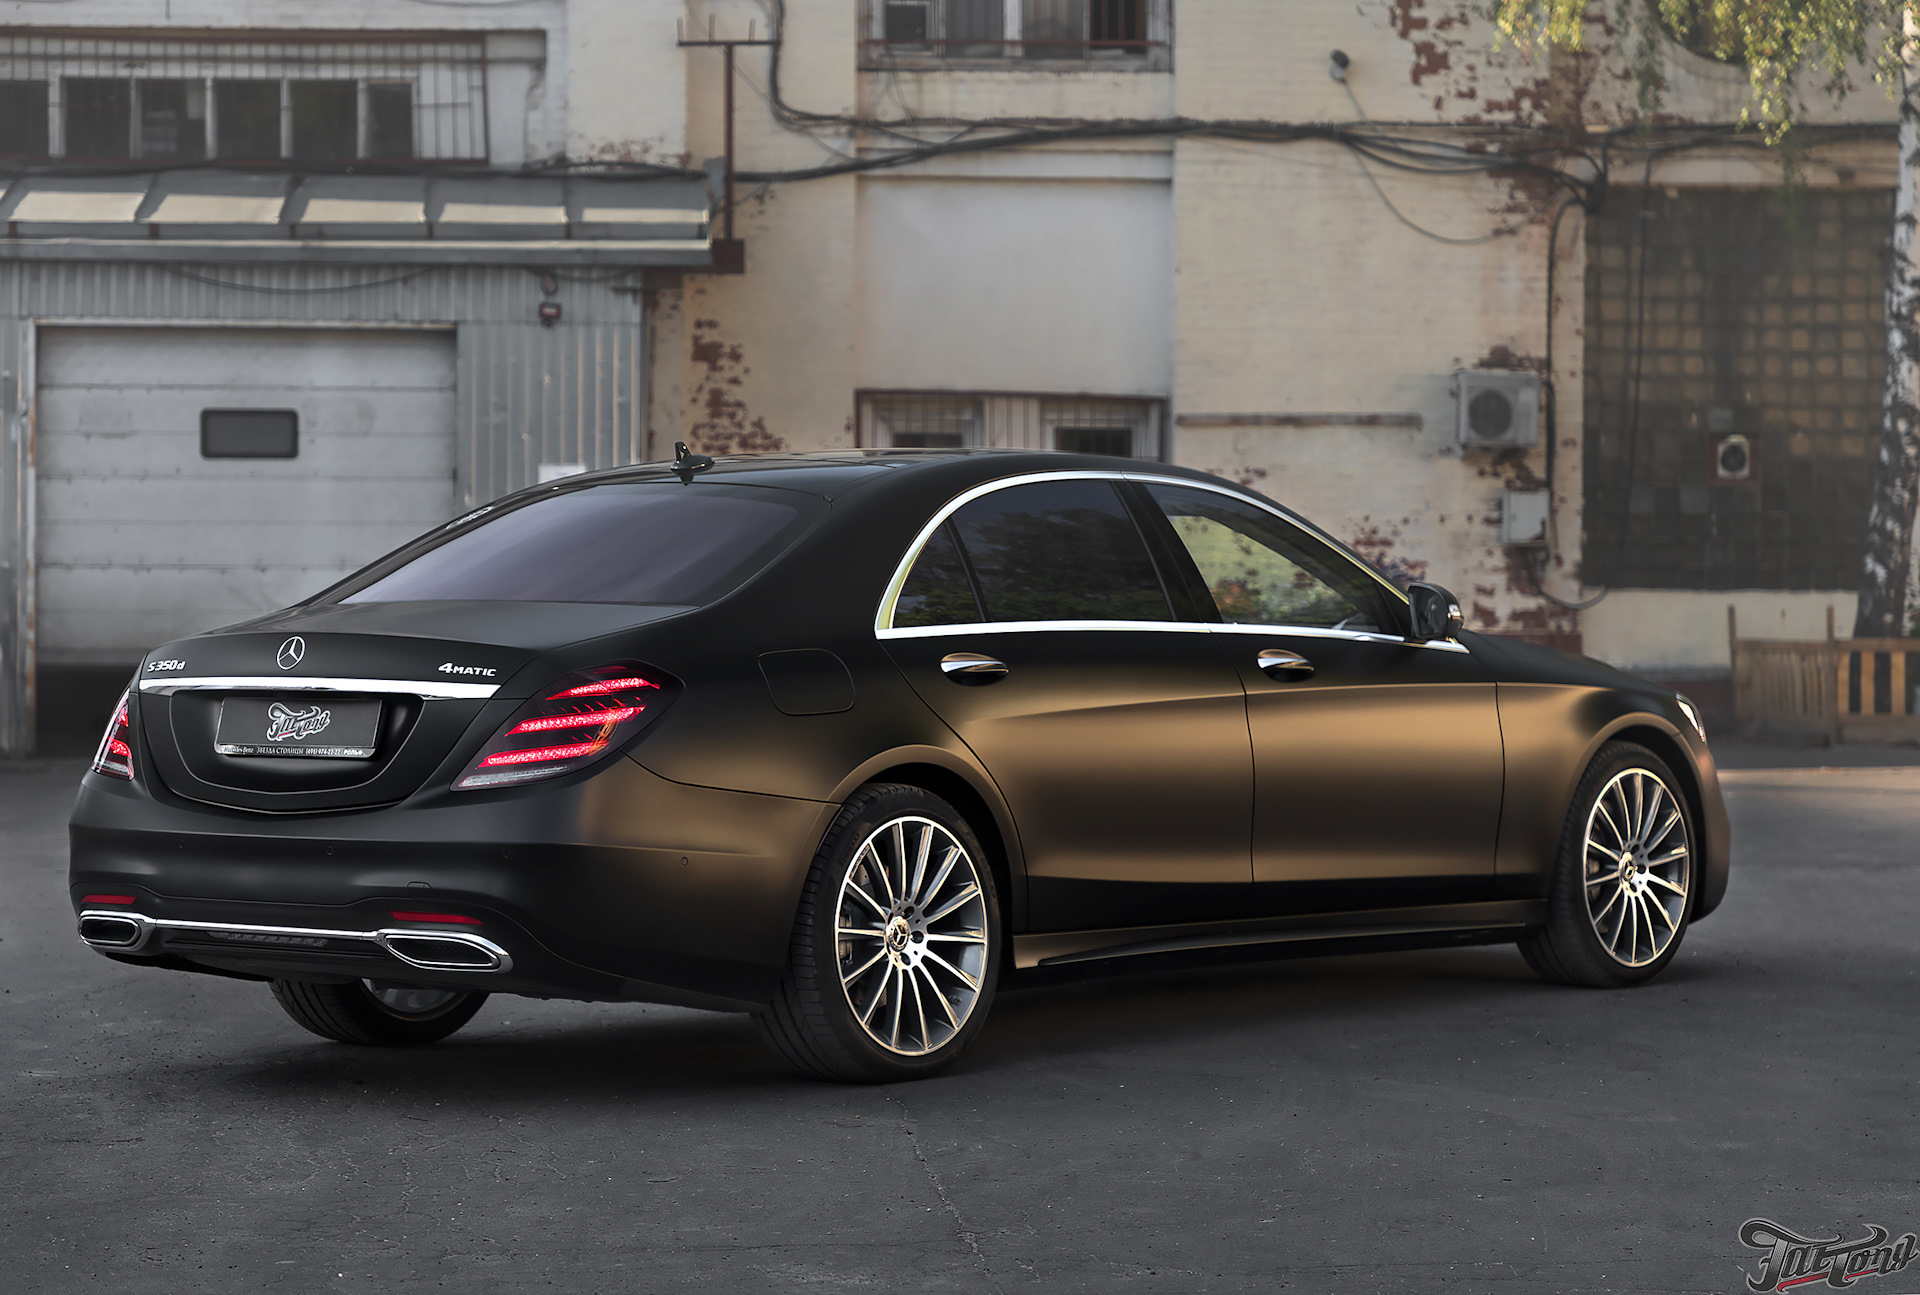 S500 w222. Мерседес Бенц 222. Мерседес w222 s-класса. Mercedes Benz s class w222. Mercedes Benz s500 w222.